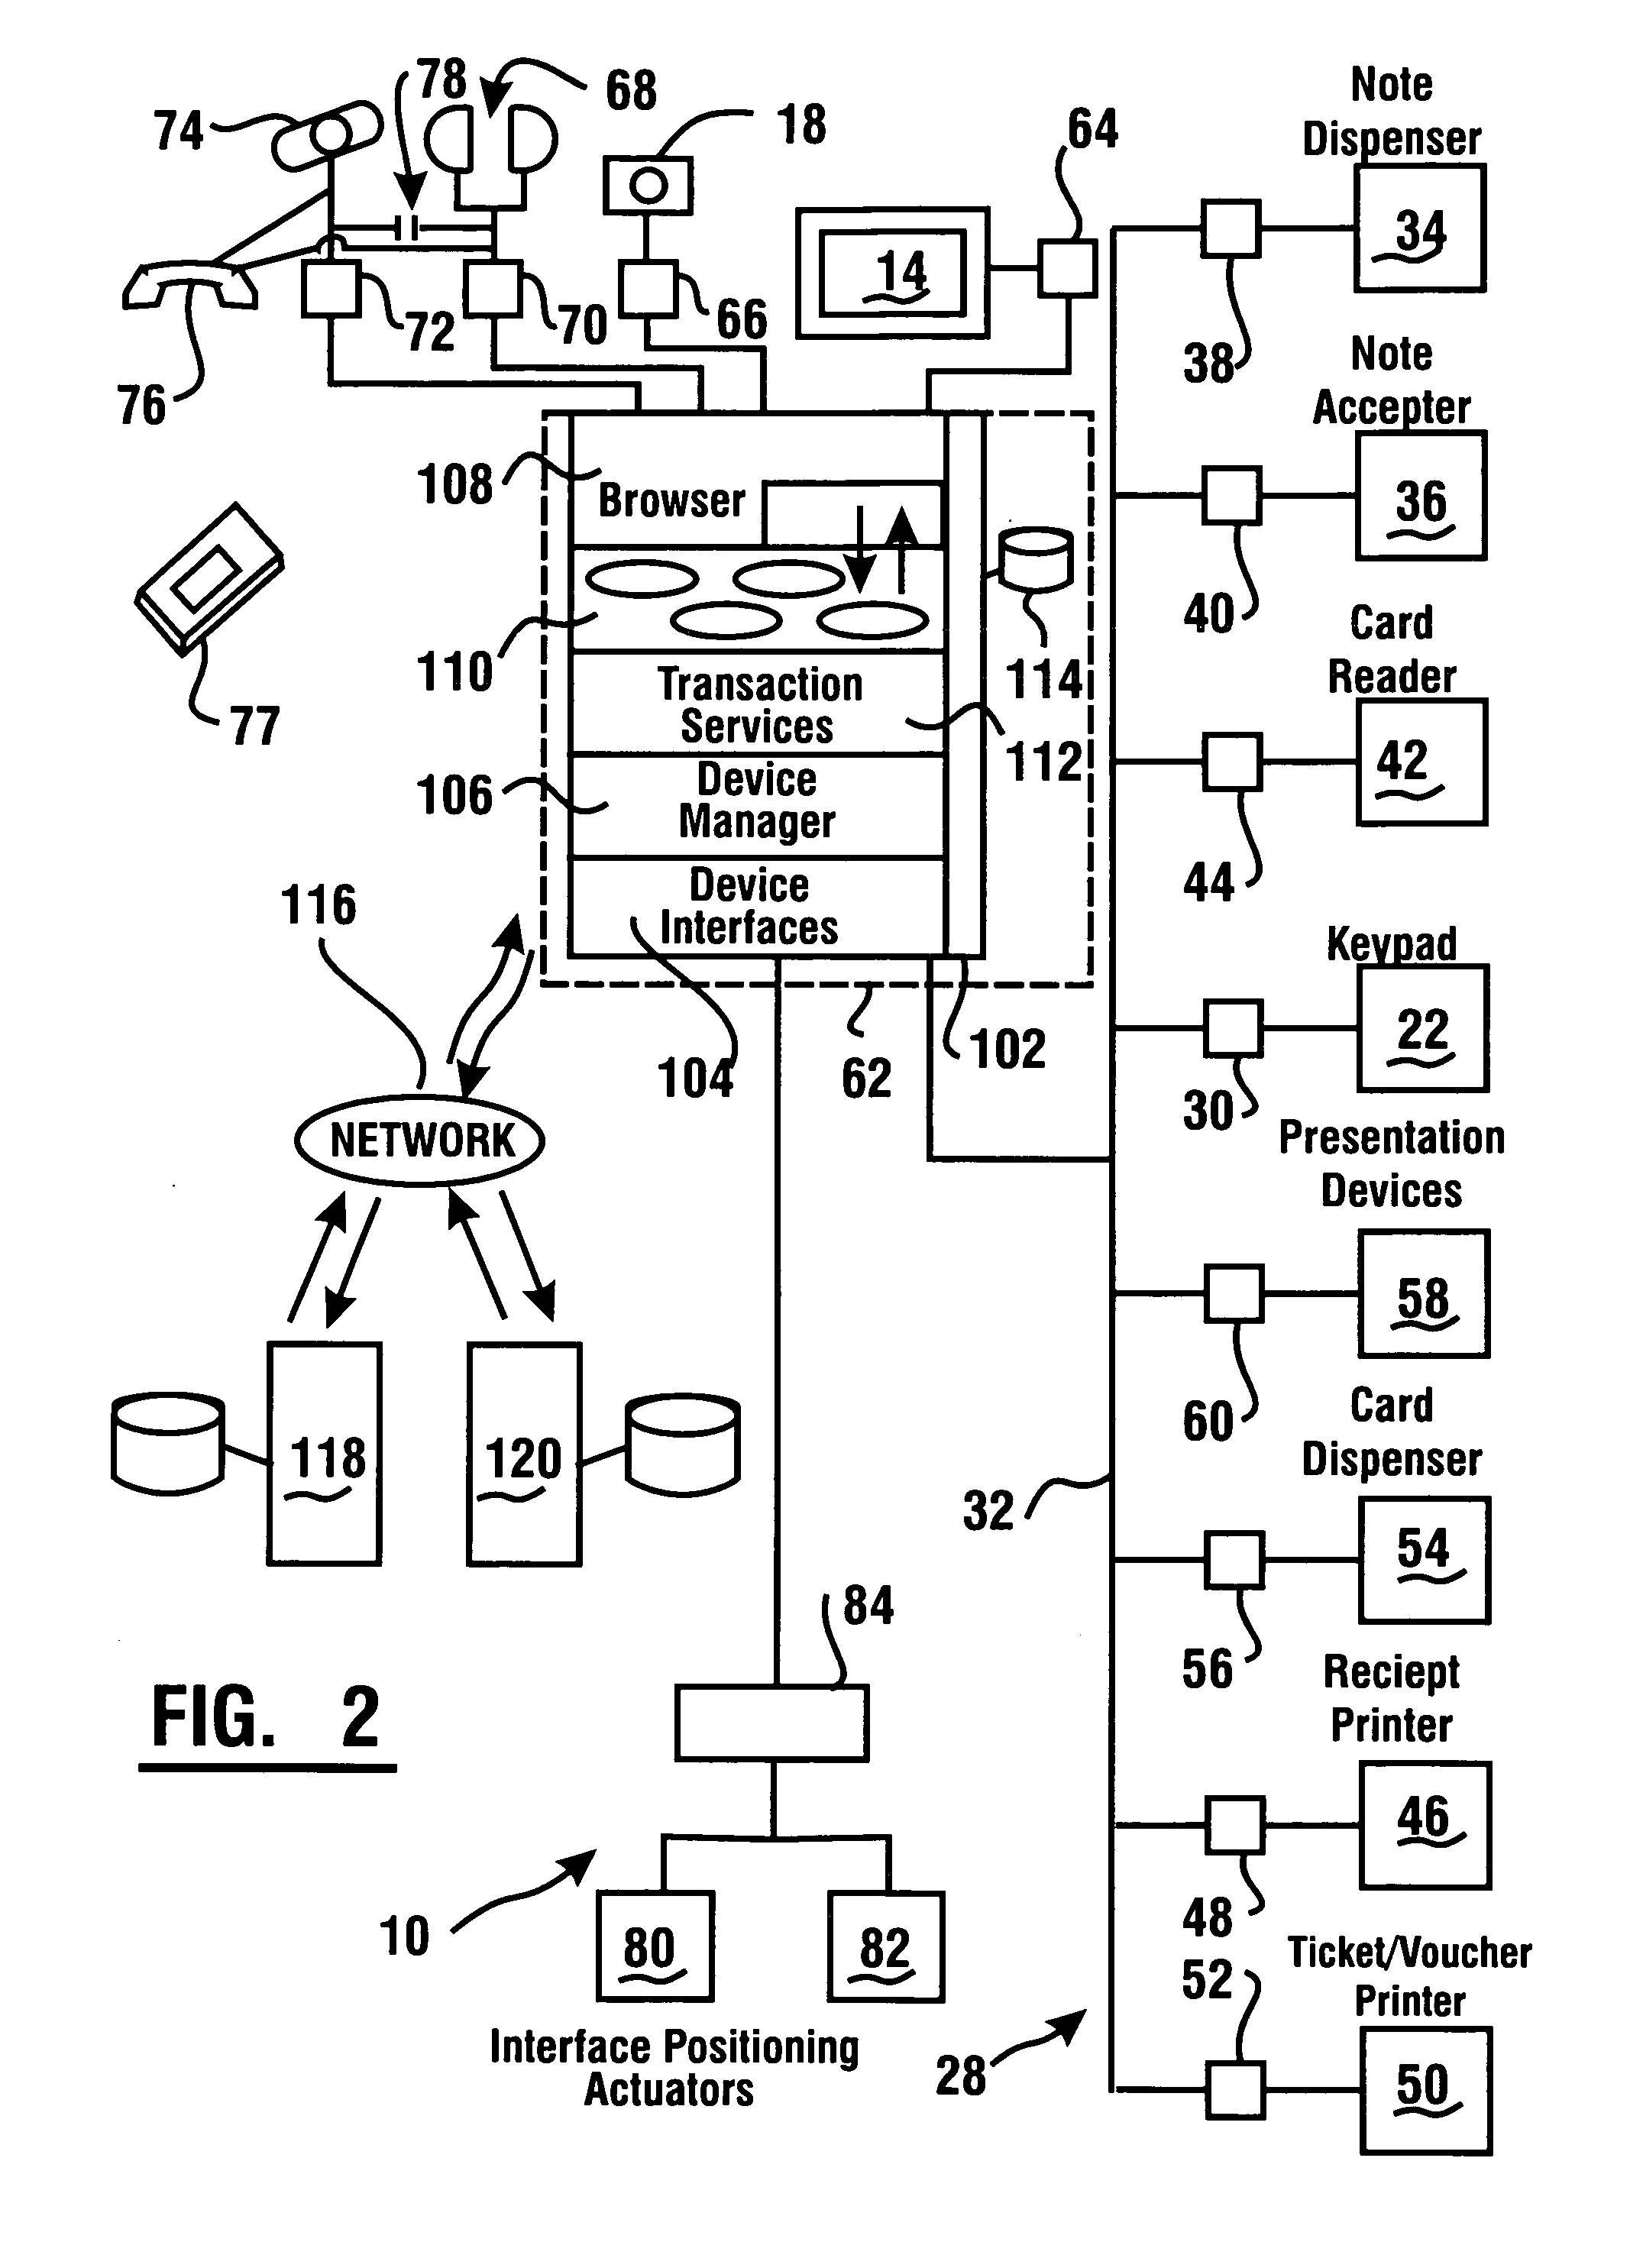 Automated financial transaction apparatus with interface that adjusts to the user